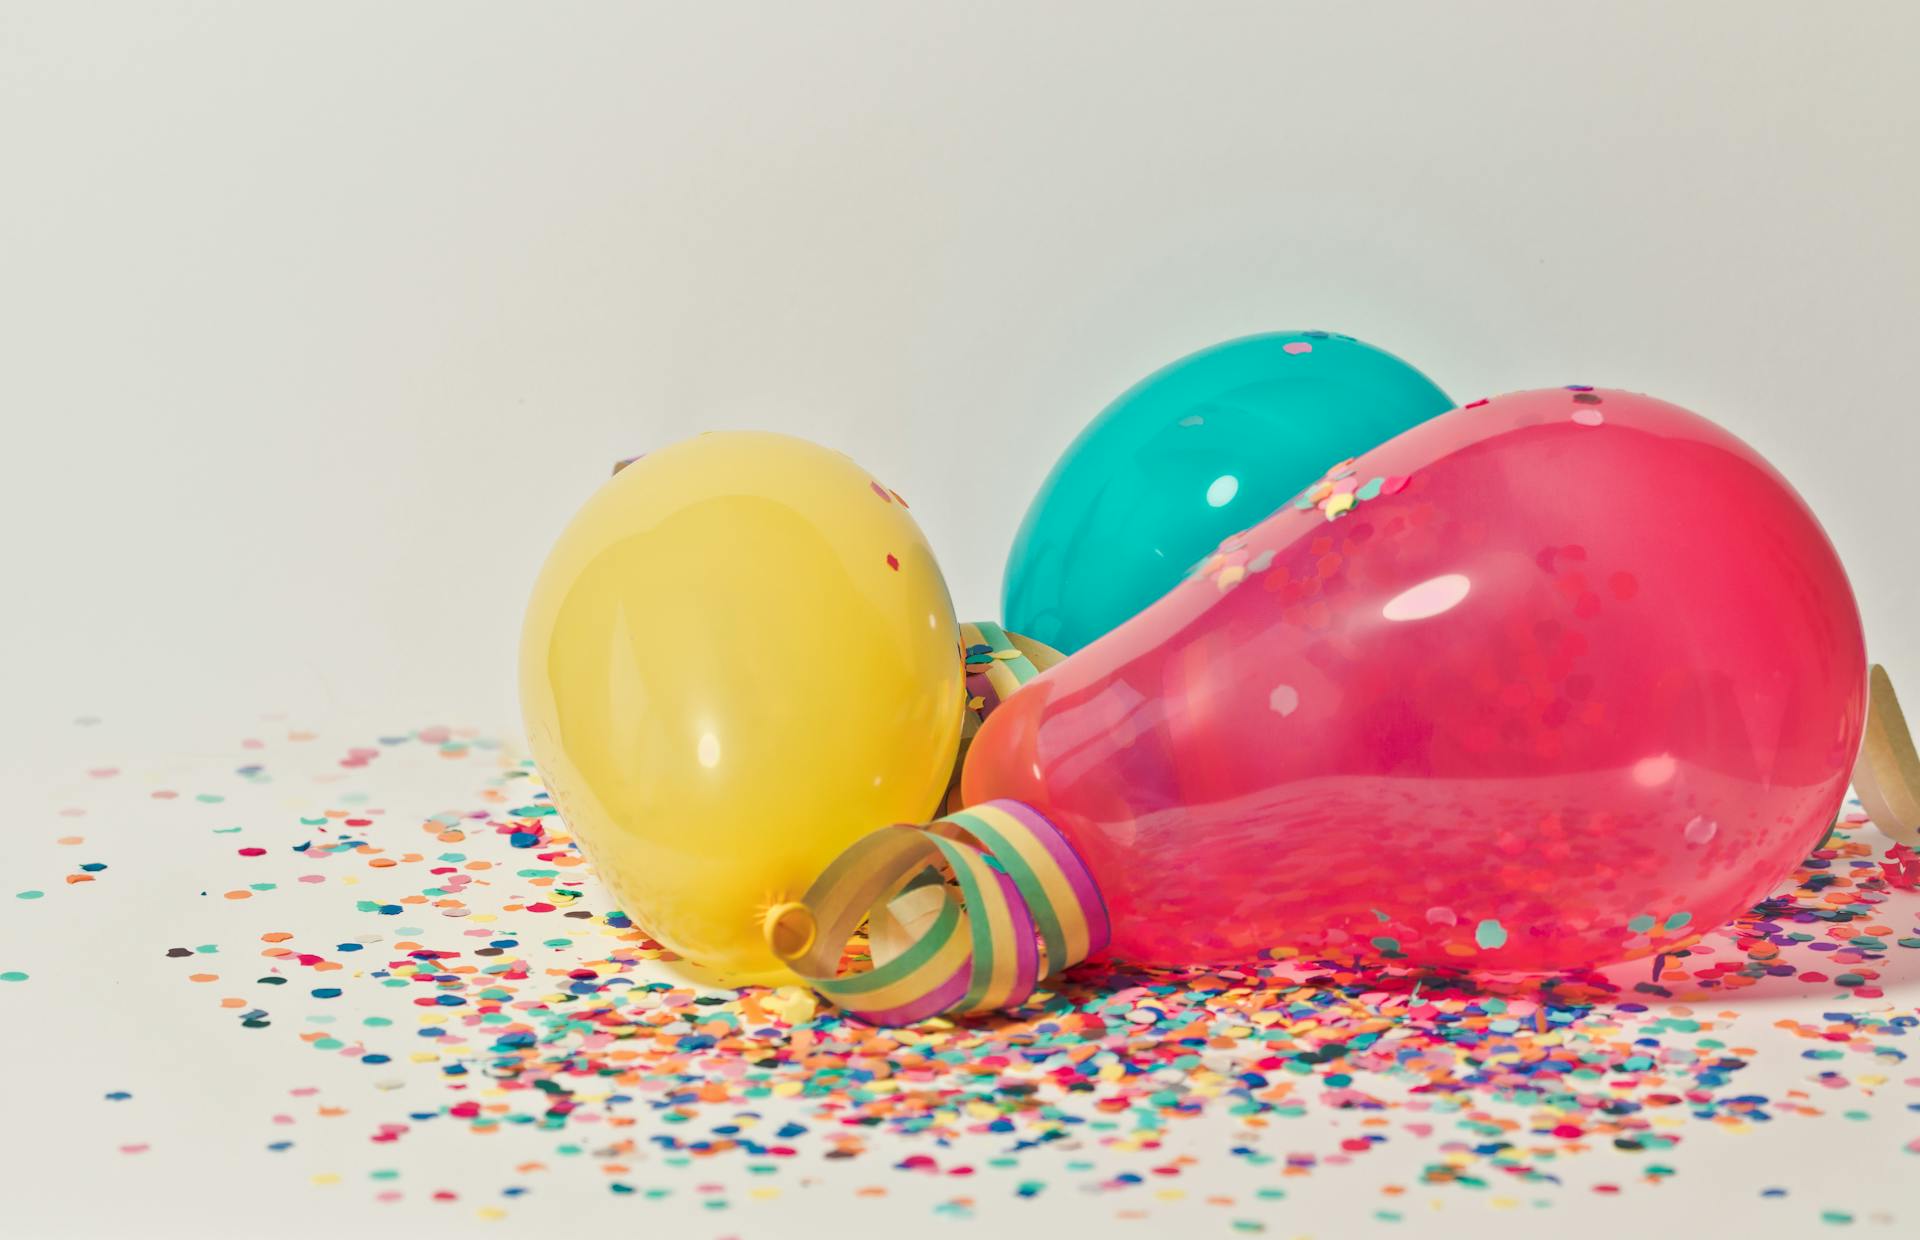 Colorful balloons with confetti | Source: Pexels